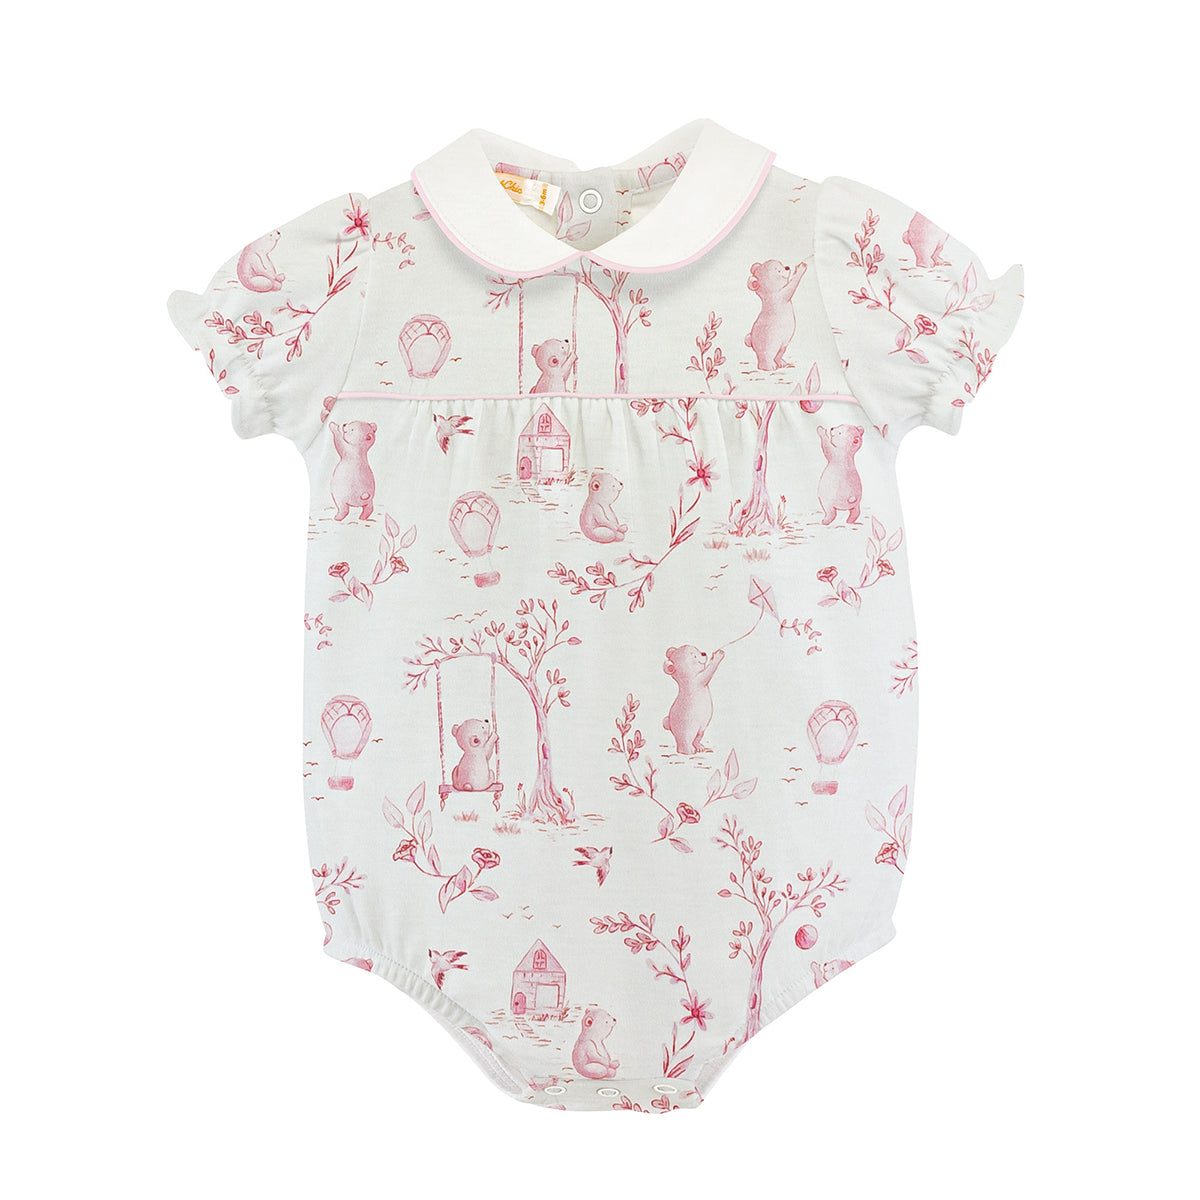 Toile de Jouy Pink Bubble for Baby Girl